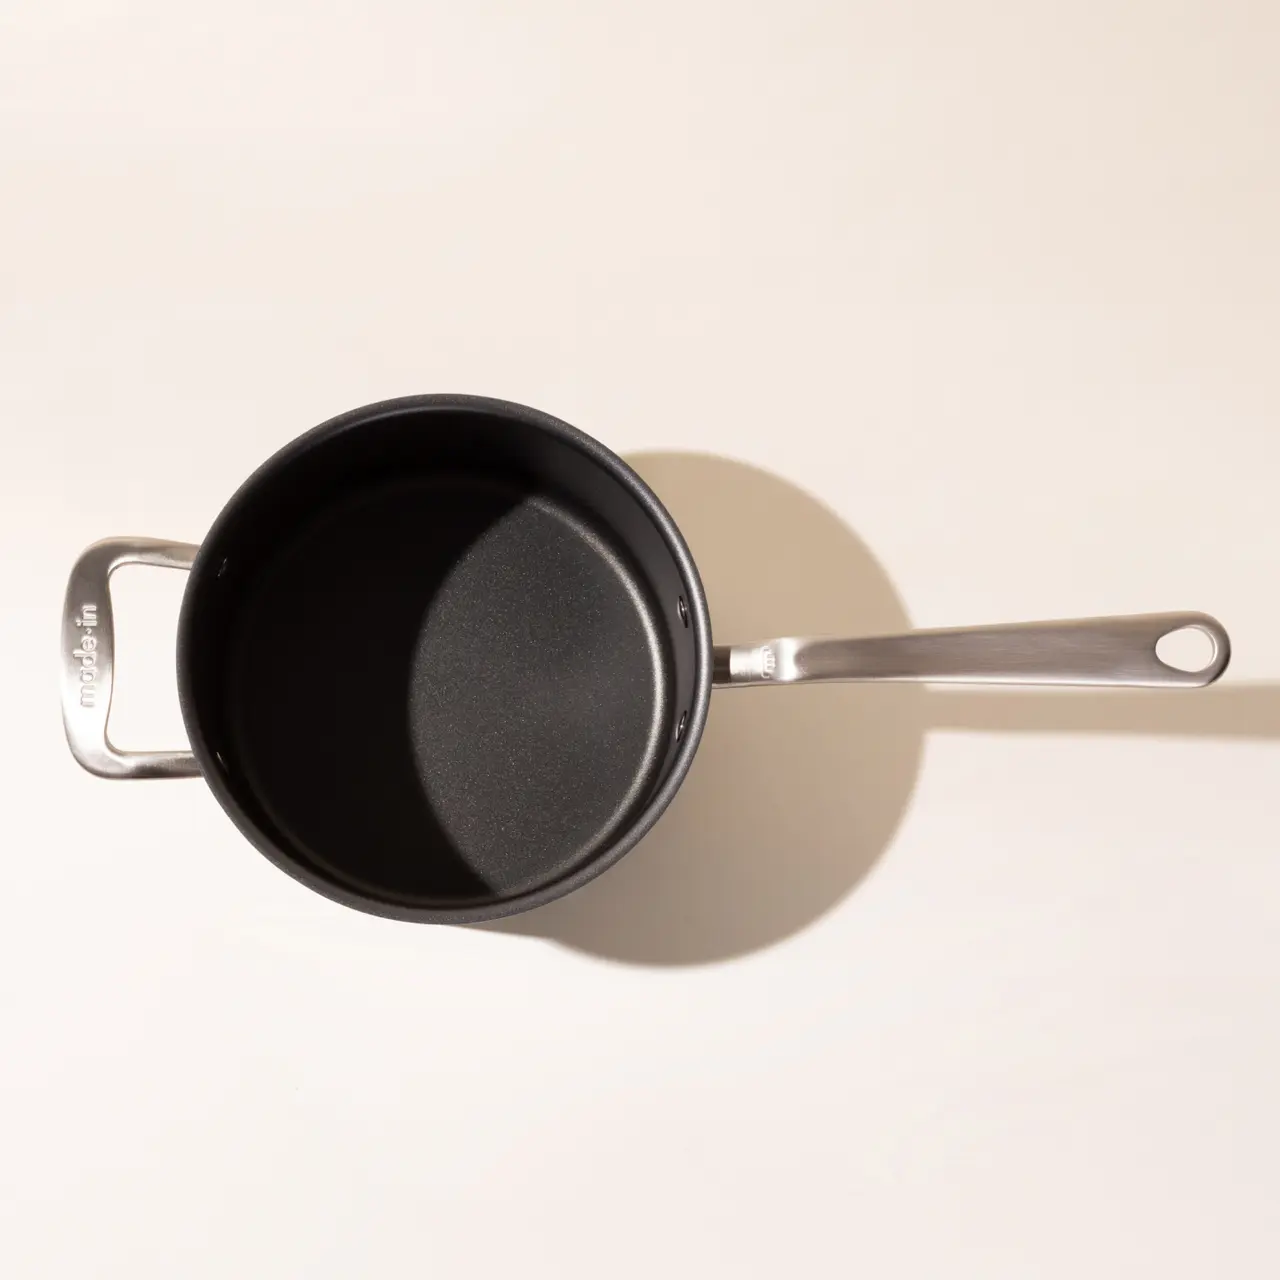 An overhead view of an empty saucepan with a long handle casting a shadow on a light surface.